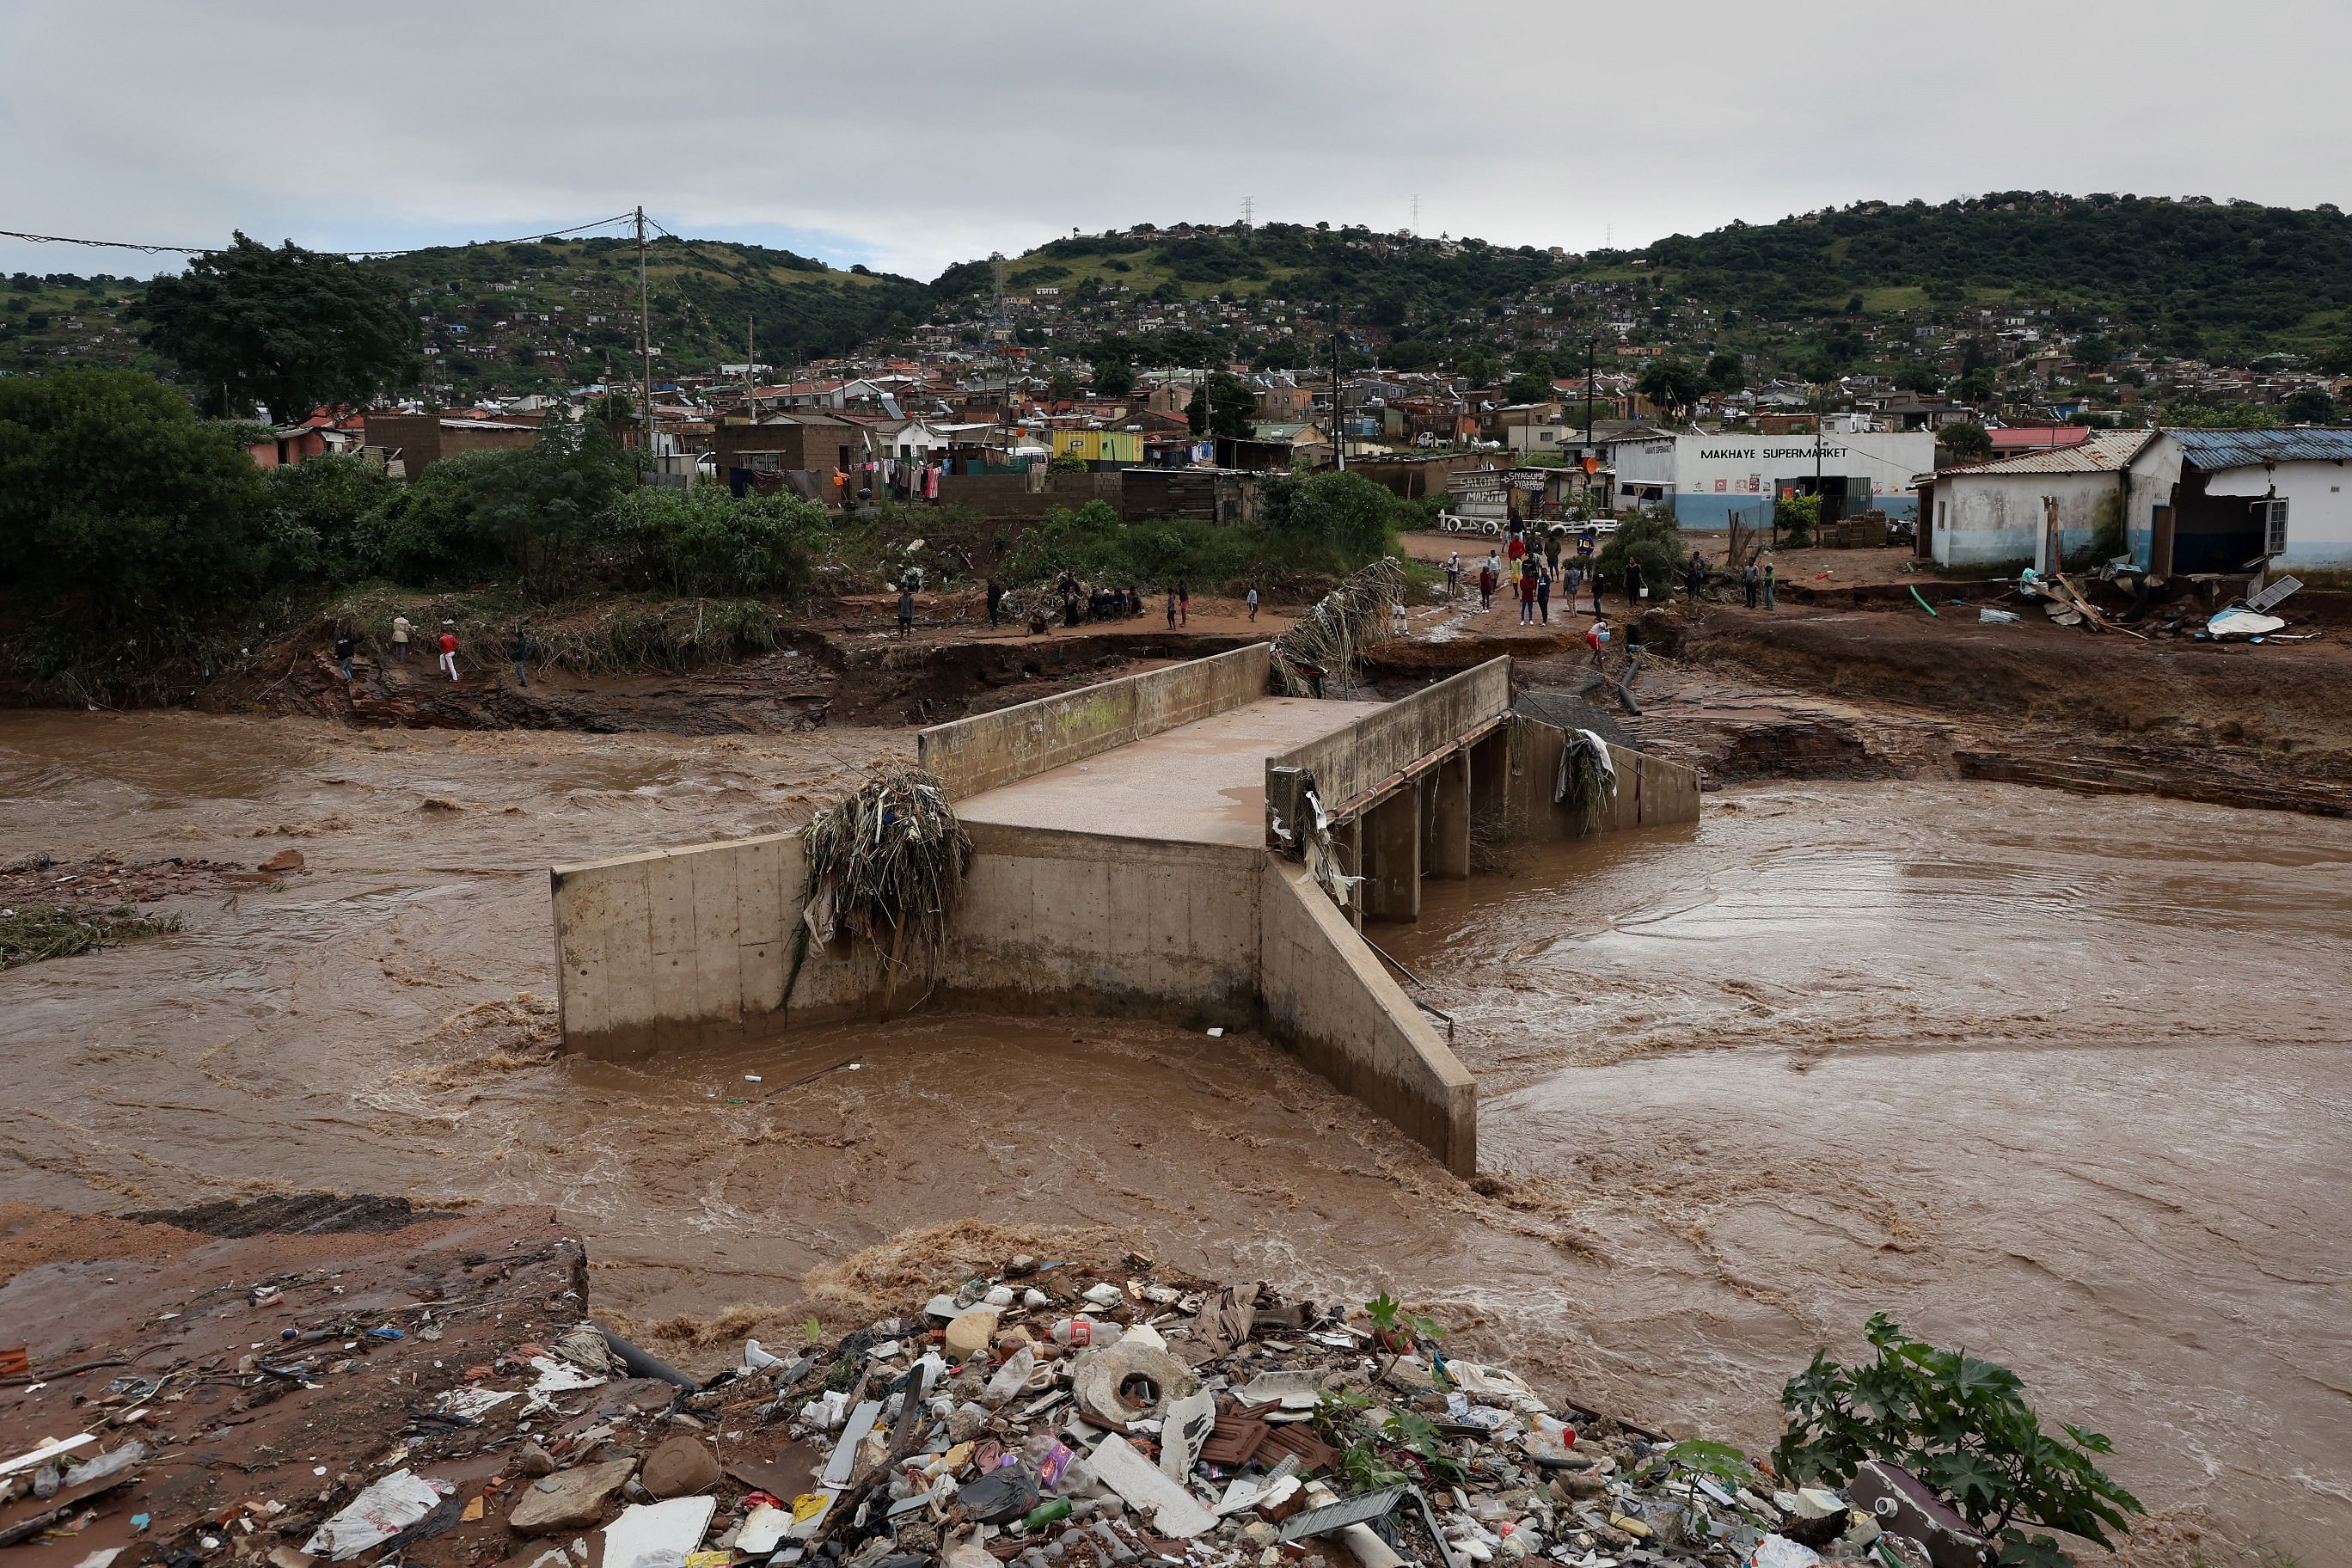 case study of floods in south africa